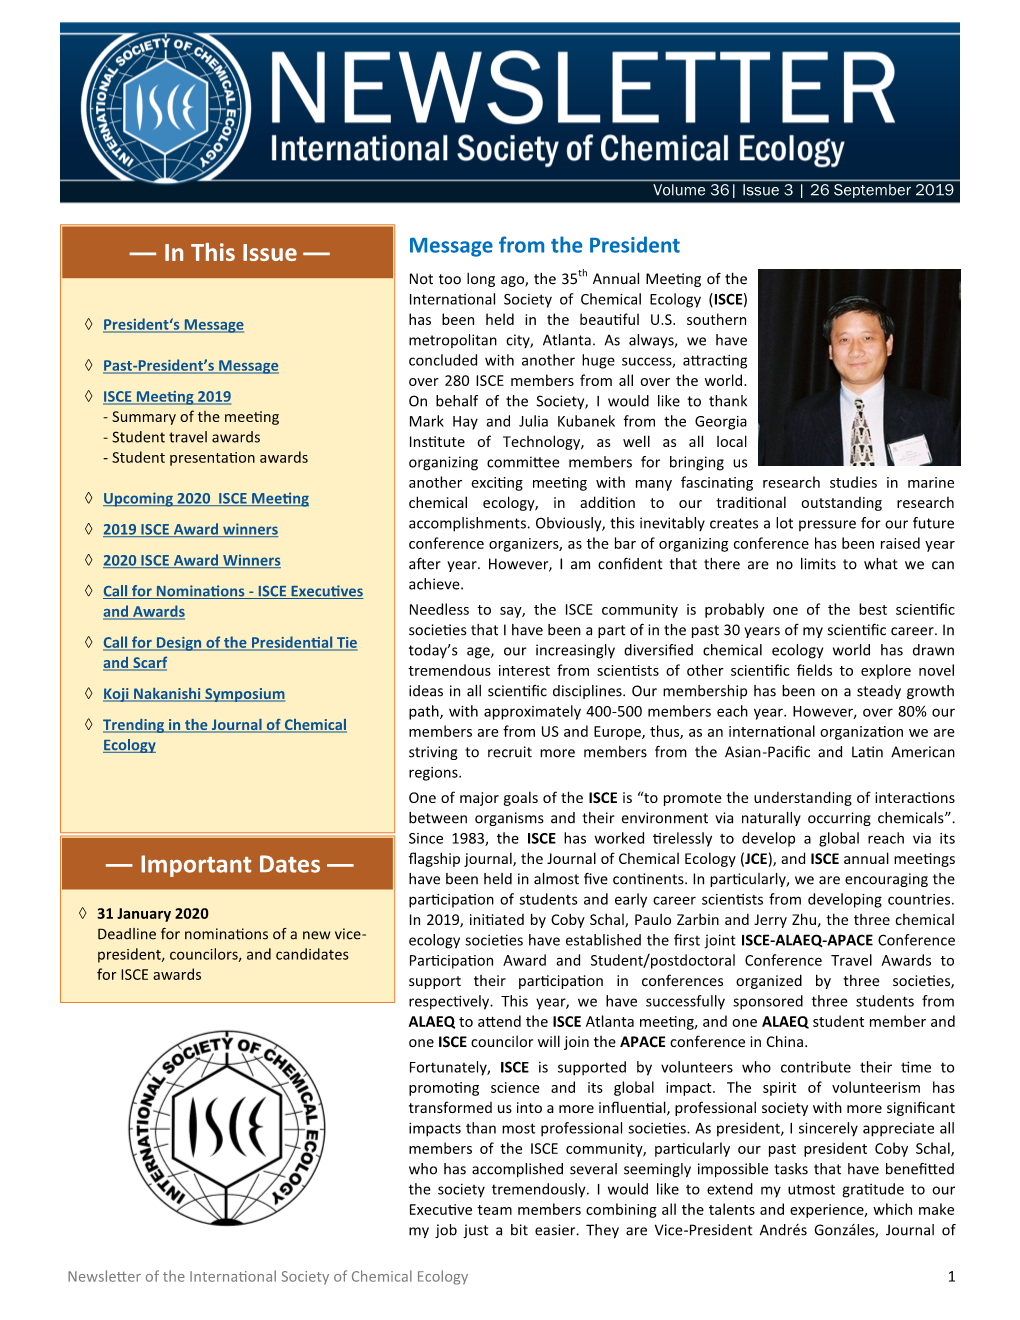 Third Issue of the 2019 ISCE Newsletter